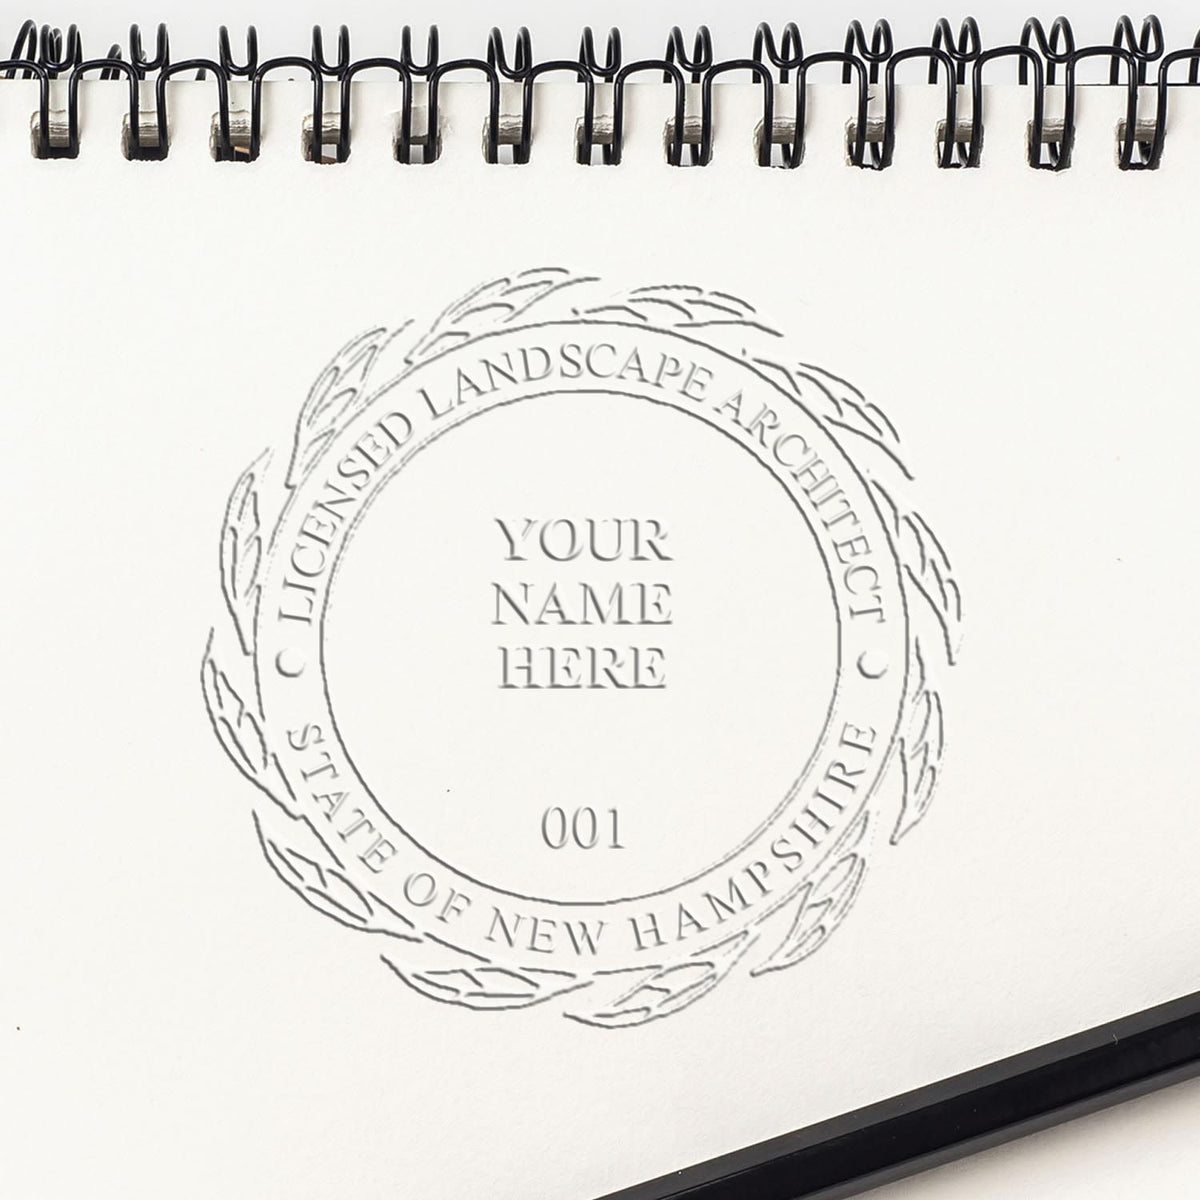 A stamped imprint of the Gift New Hampshire Landscape Architect Seal in this stylish lifestyle photo, setting the tone for a unique and personalized product.